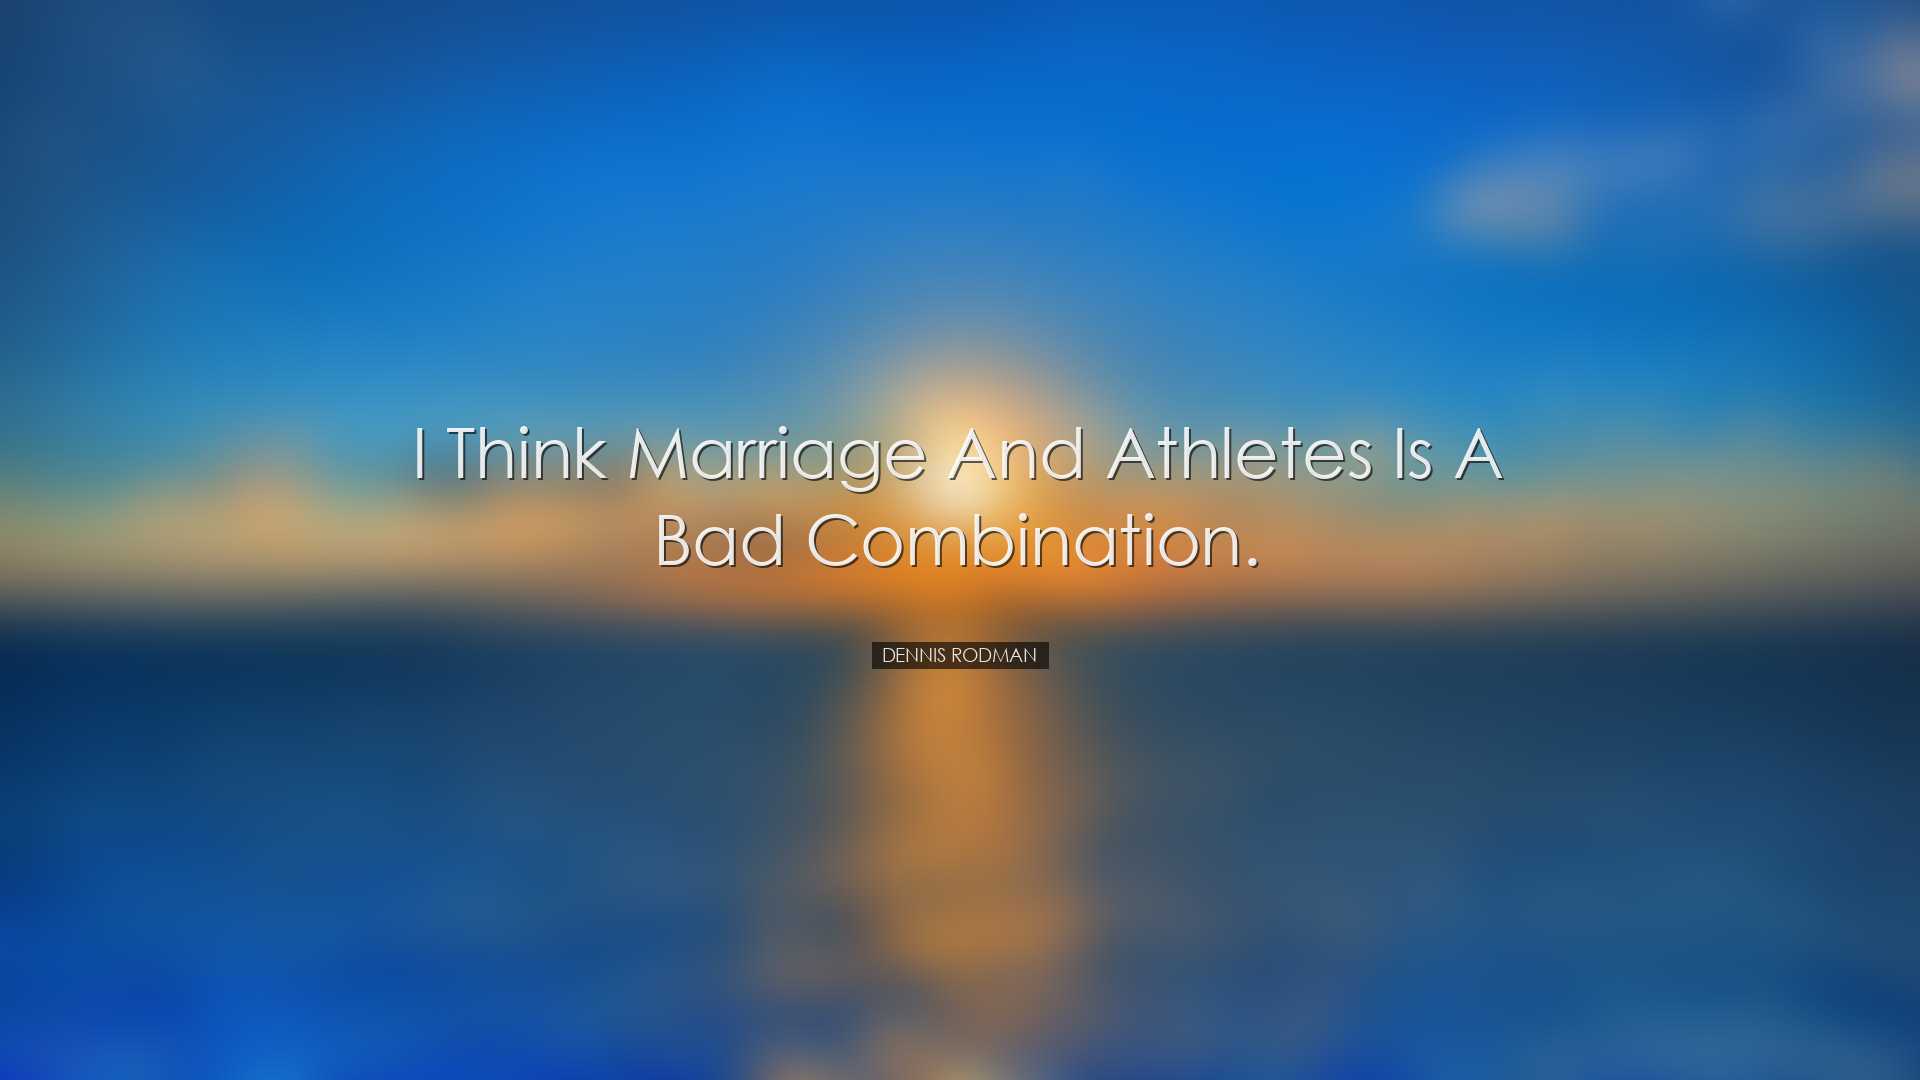 I think marriage and athletes is a bad combination. - Dennis Rodma